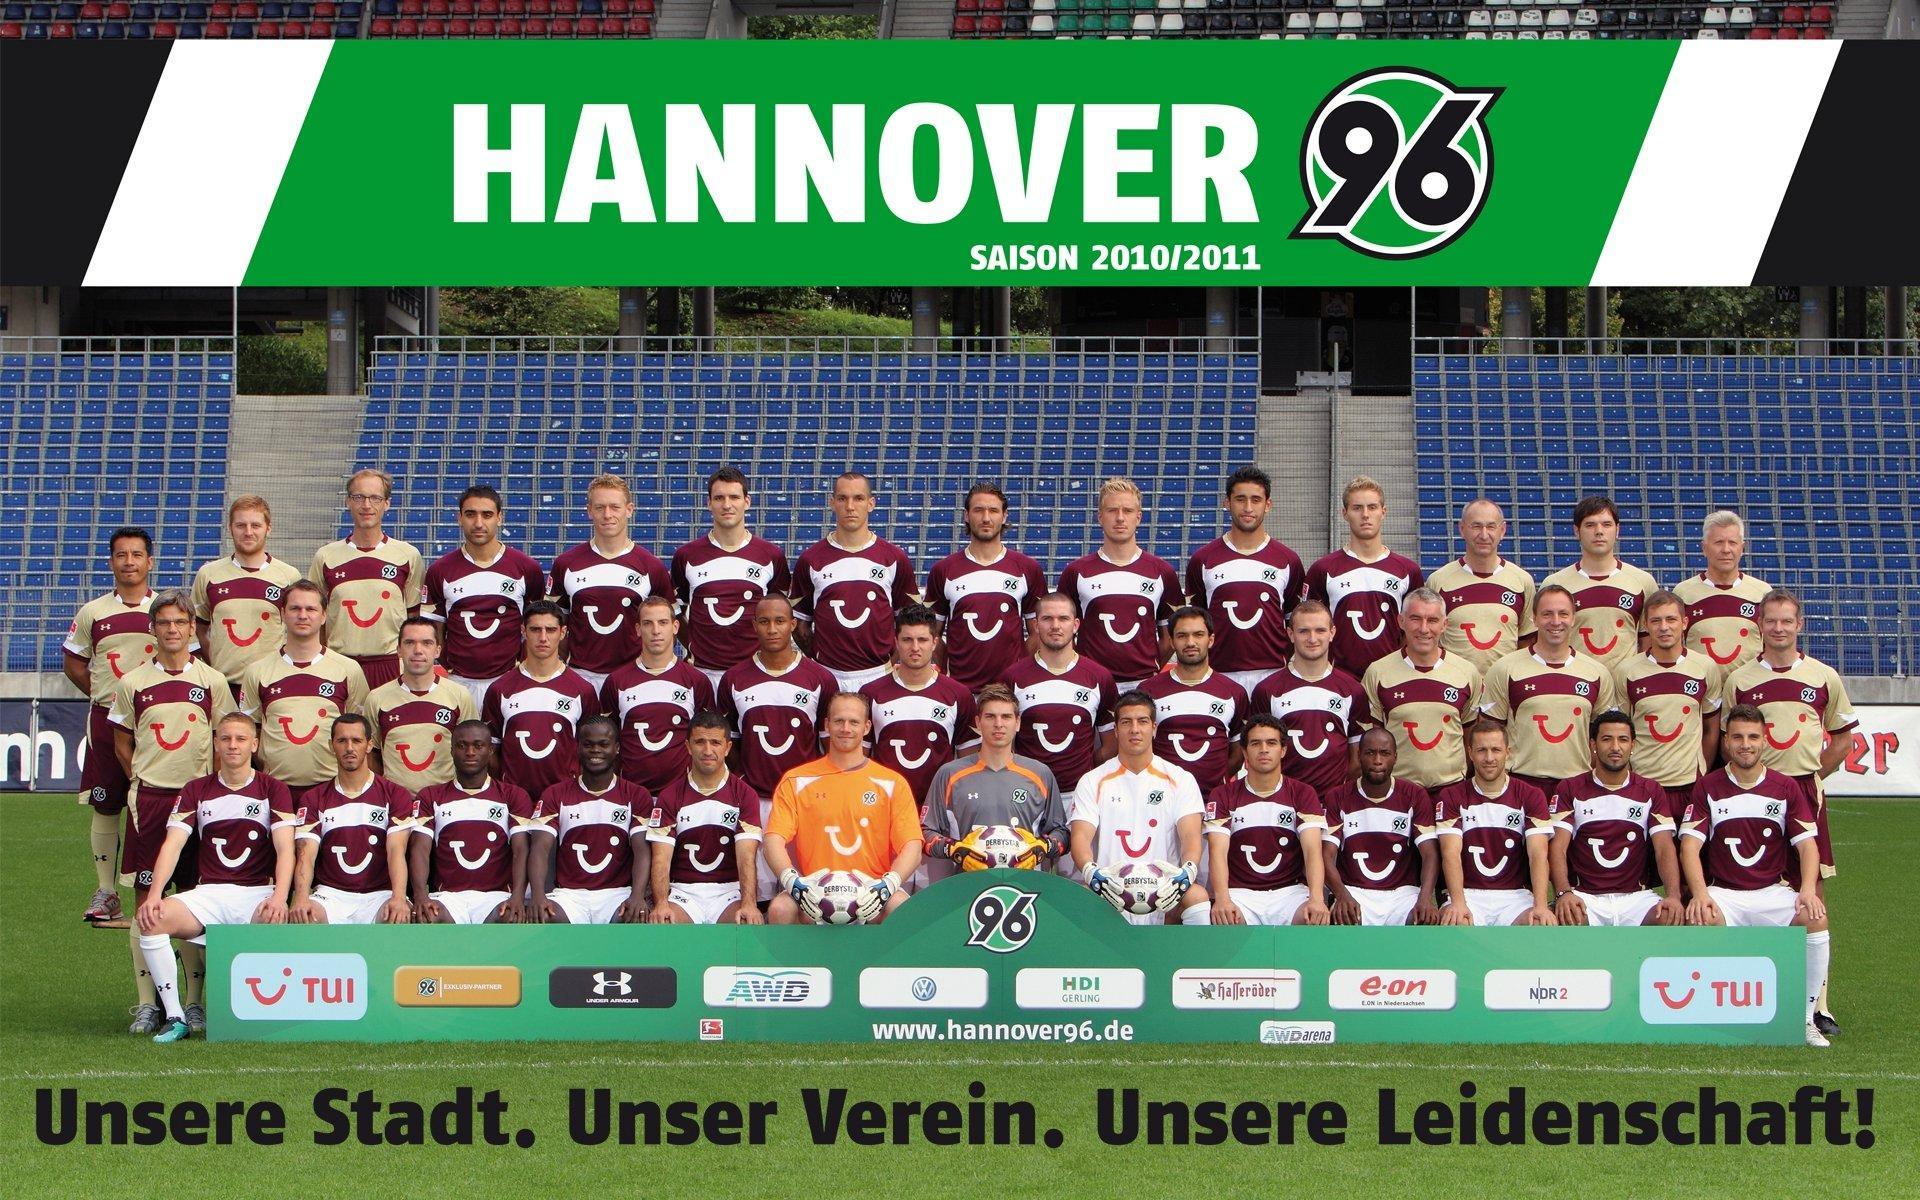 Hannover 96 Wallpaper (Picture)